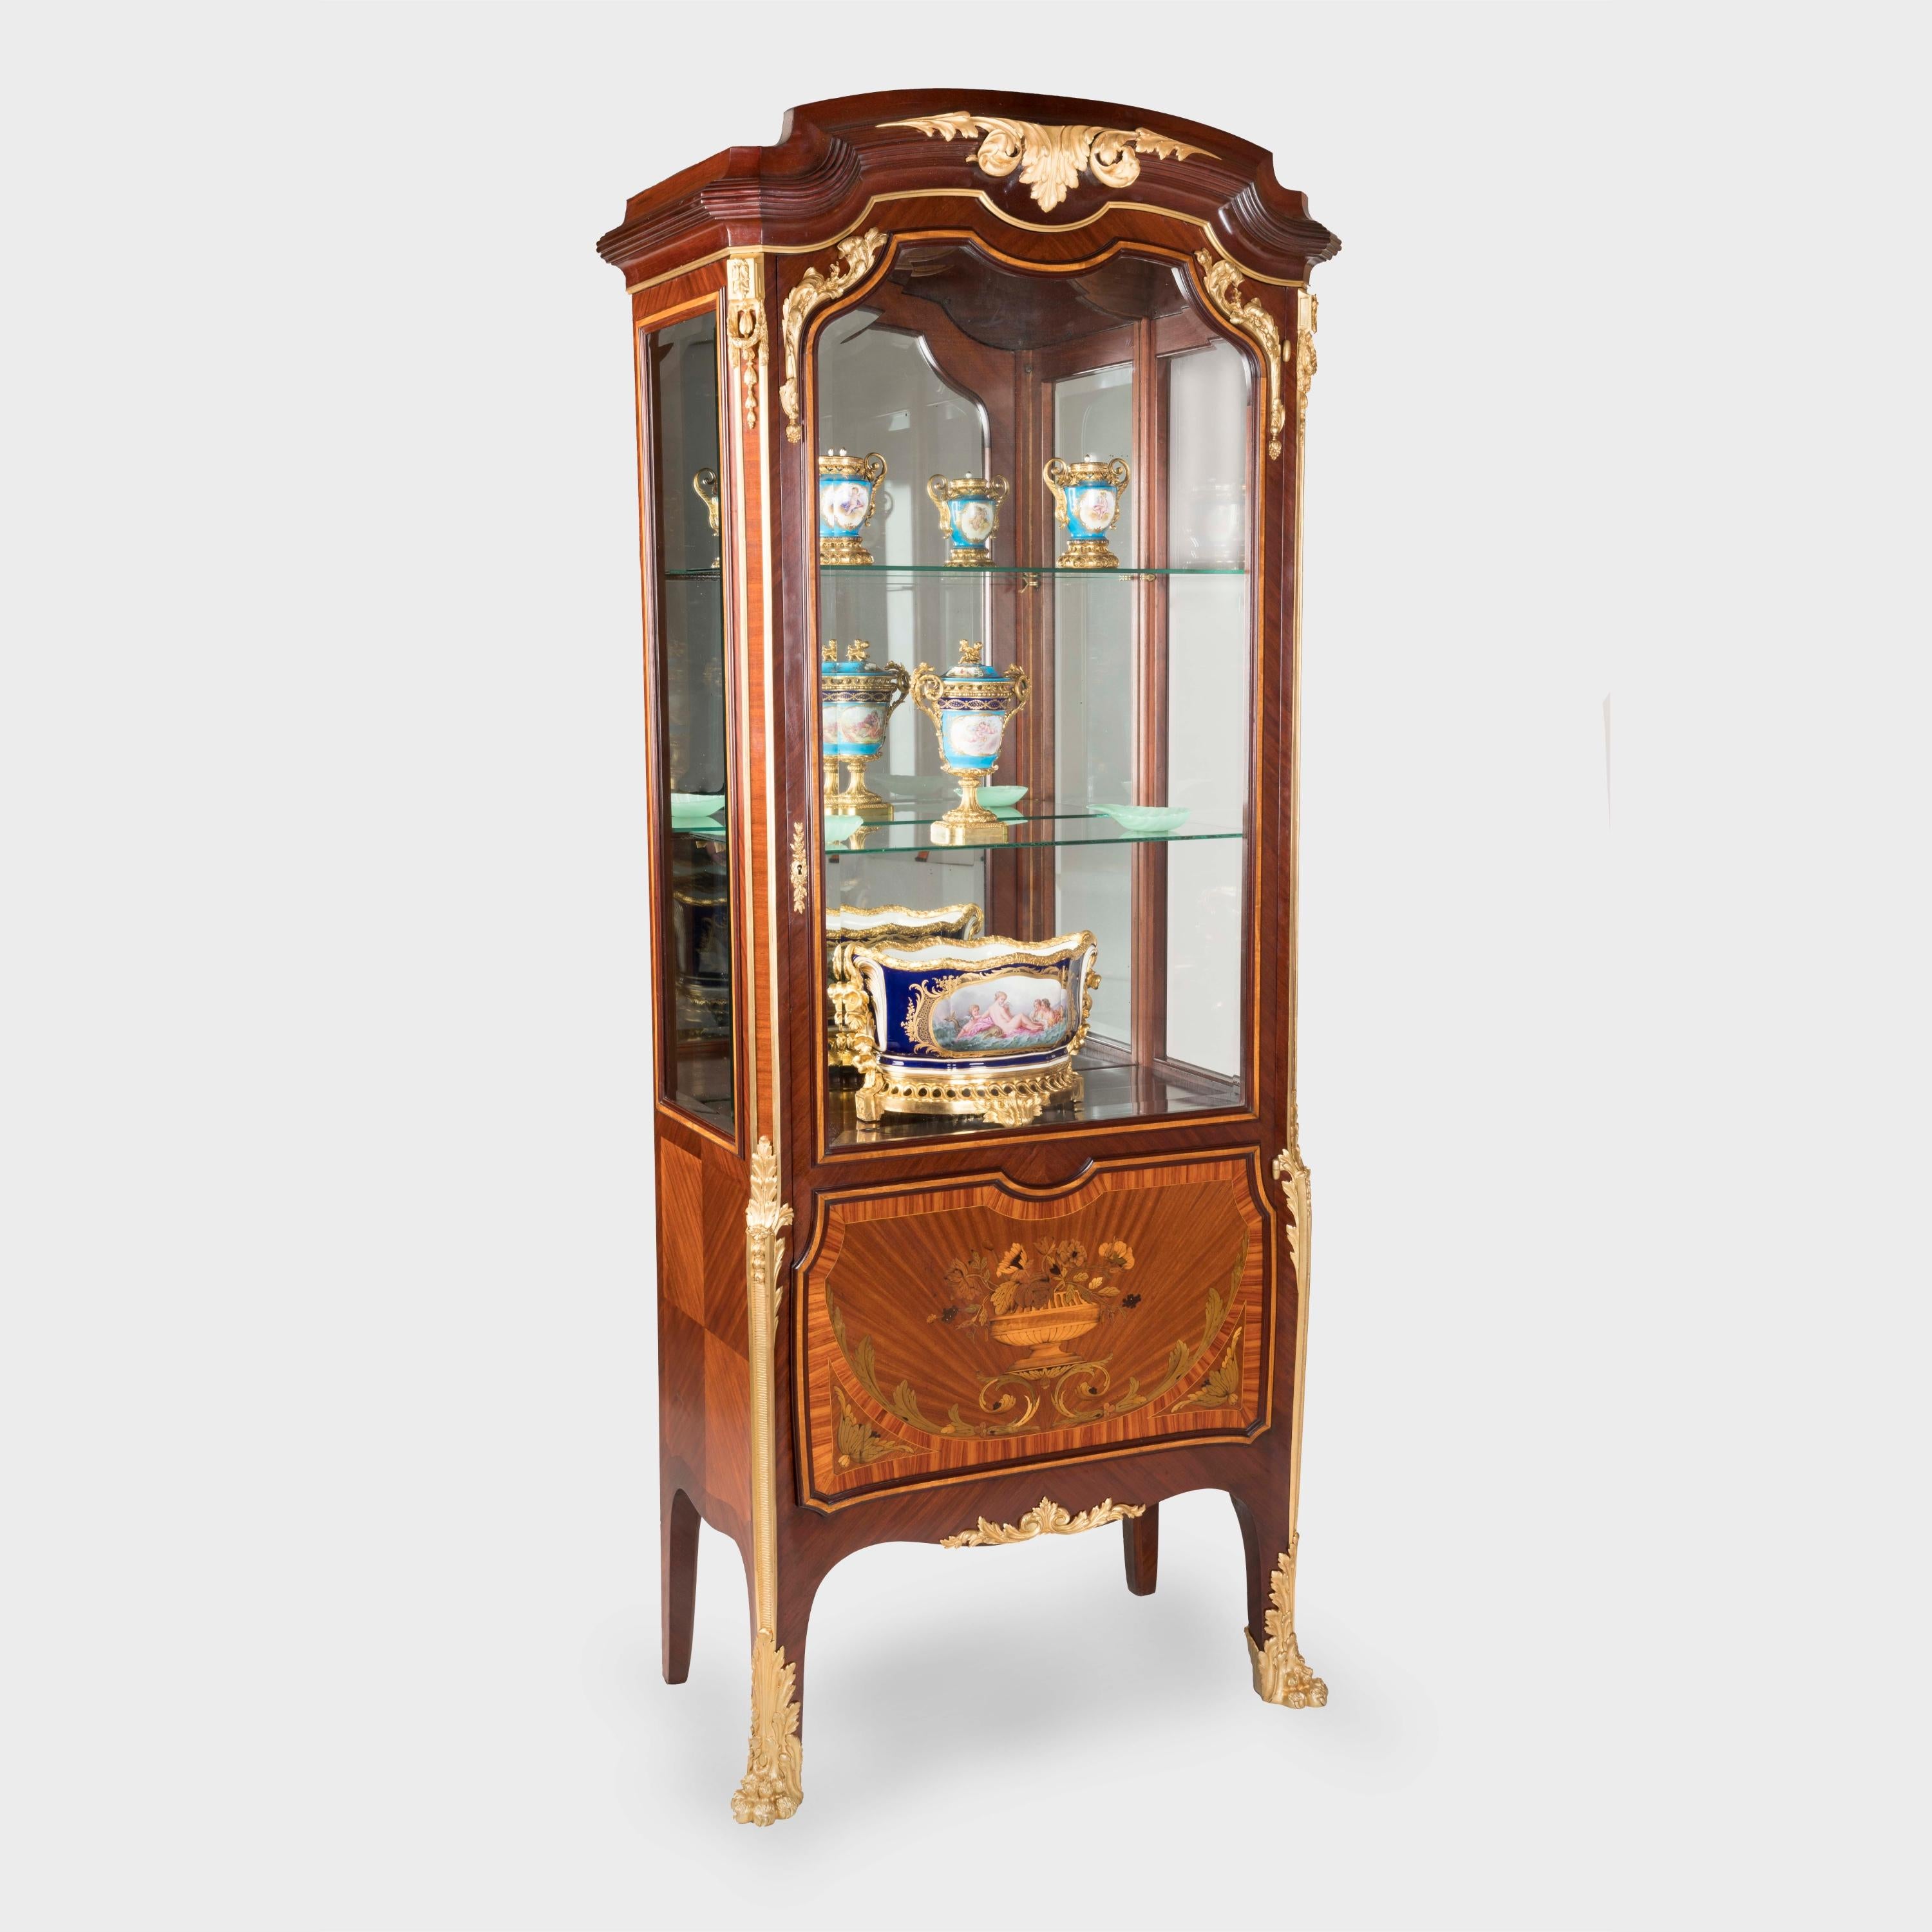 A pair of Marquetry display cabinets
in the transitional manner

By Edmund Kahn of London & Paris 

Constructed from kingwood, with tulipwood, bois satiné and harewood inlays; finished with extensive ormolu mounts; each cabinet supported on